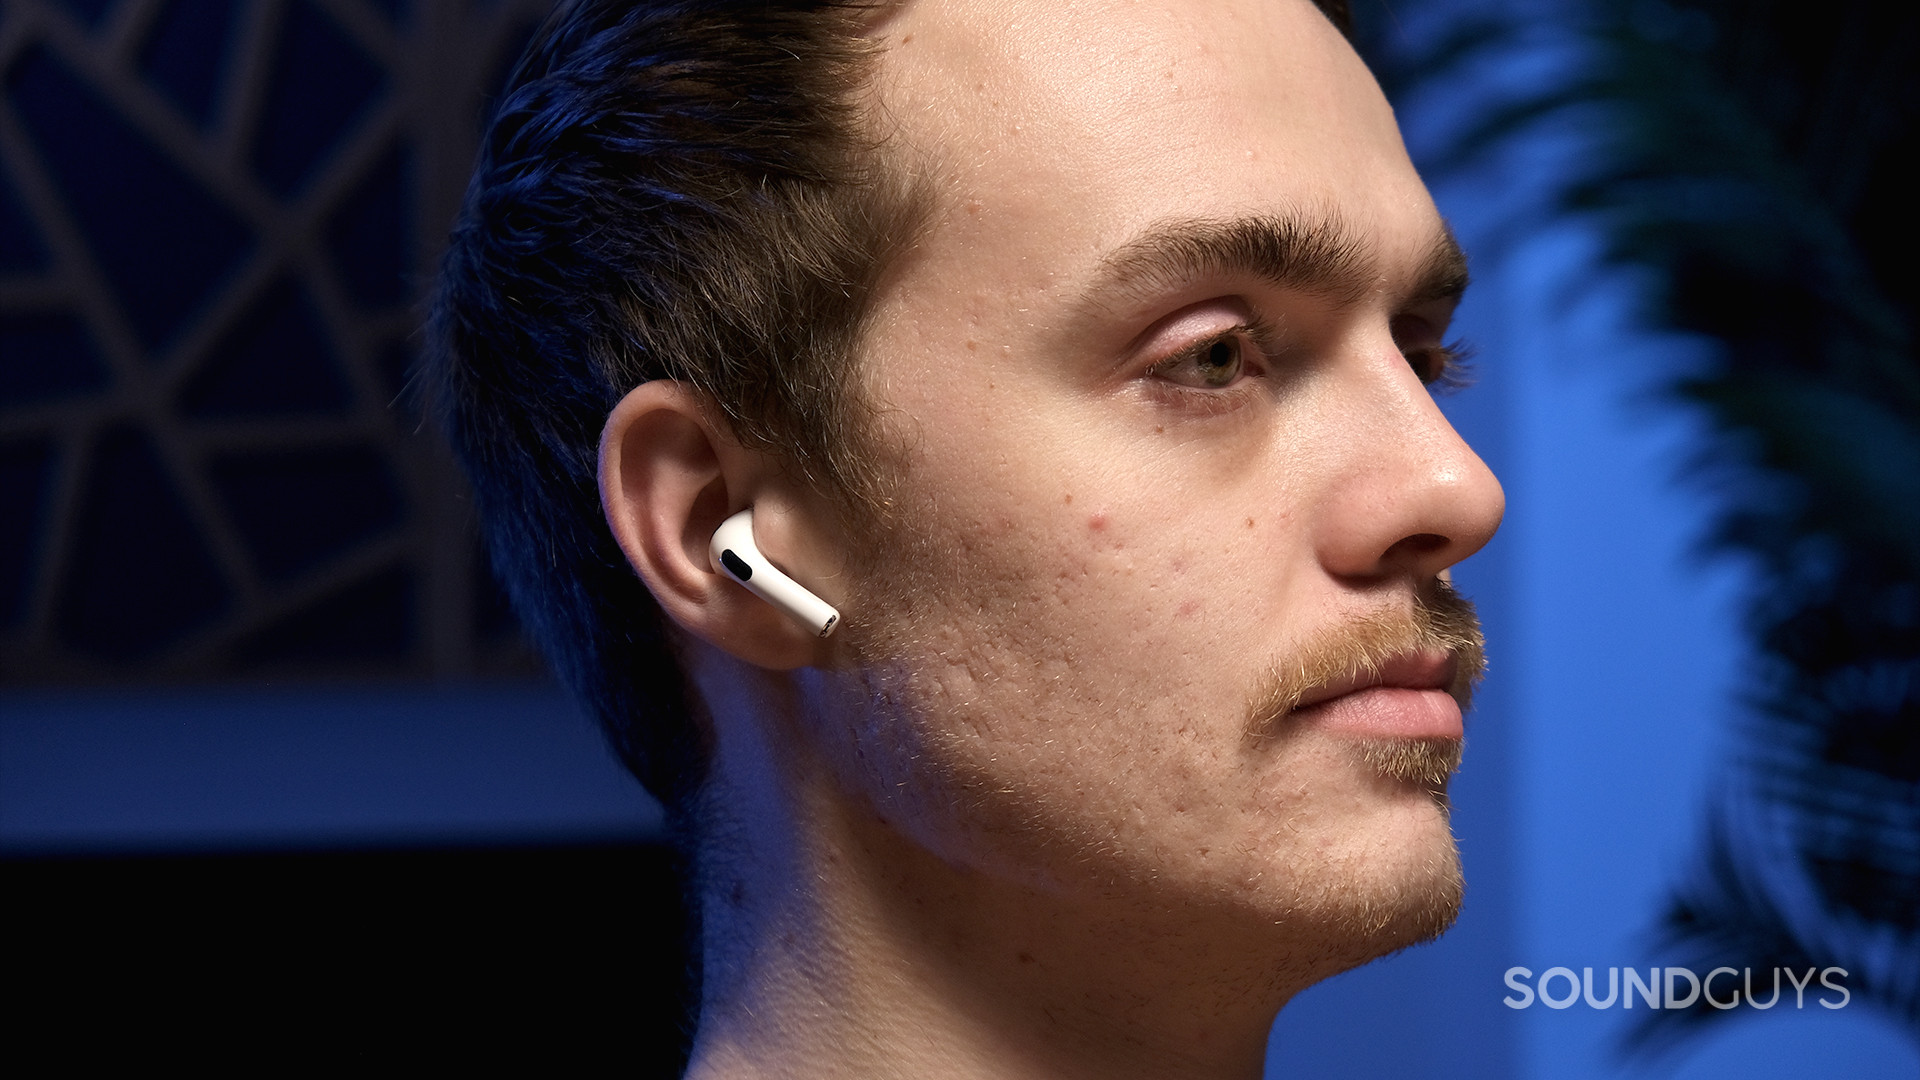 A masculine person wears the Apple AirPods (3rd generation) against a blue background.